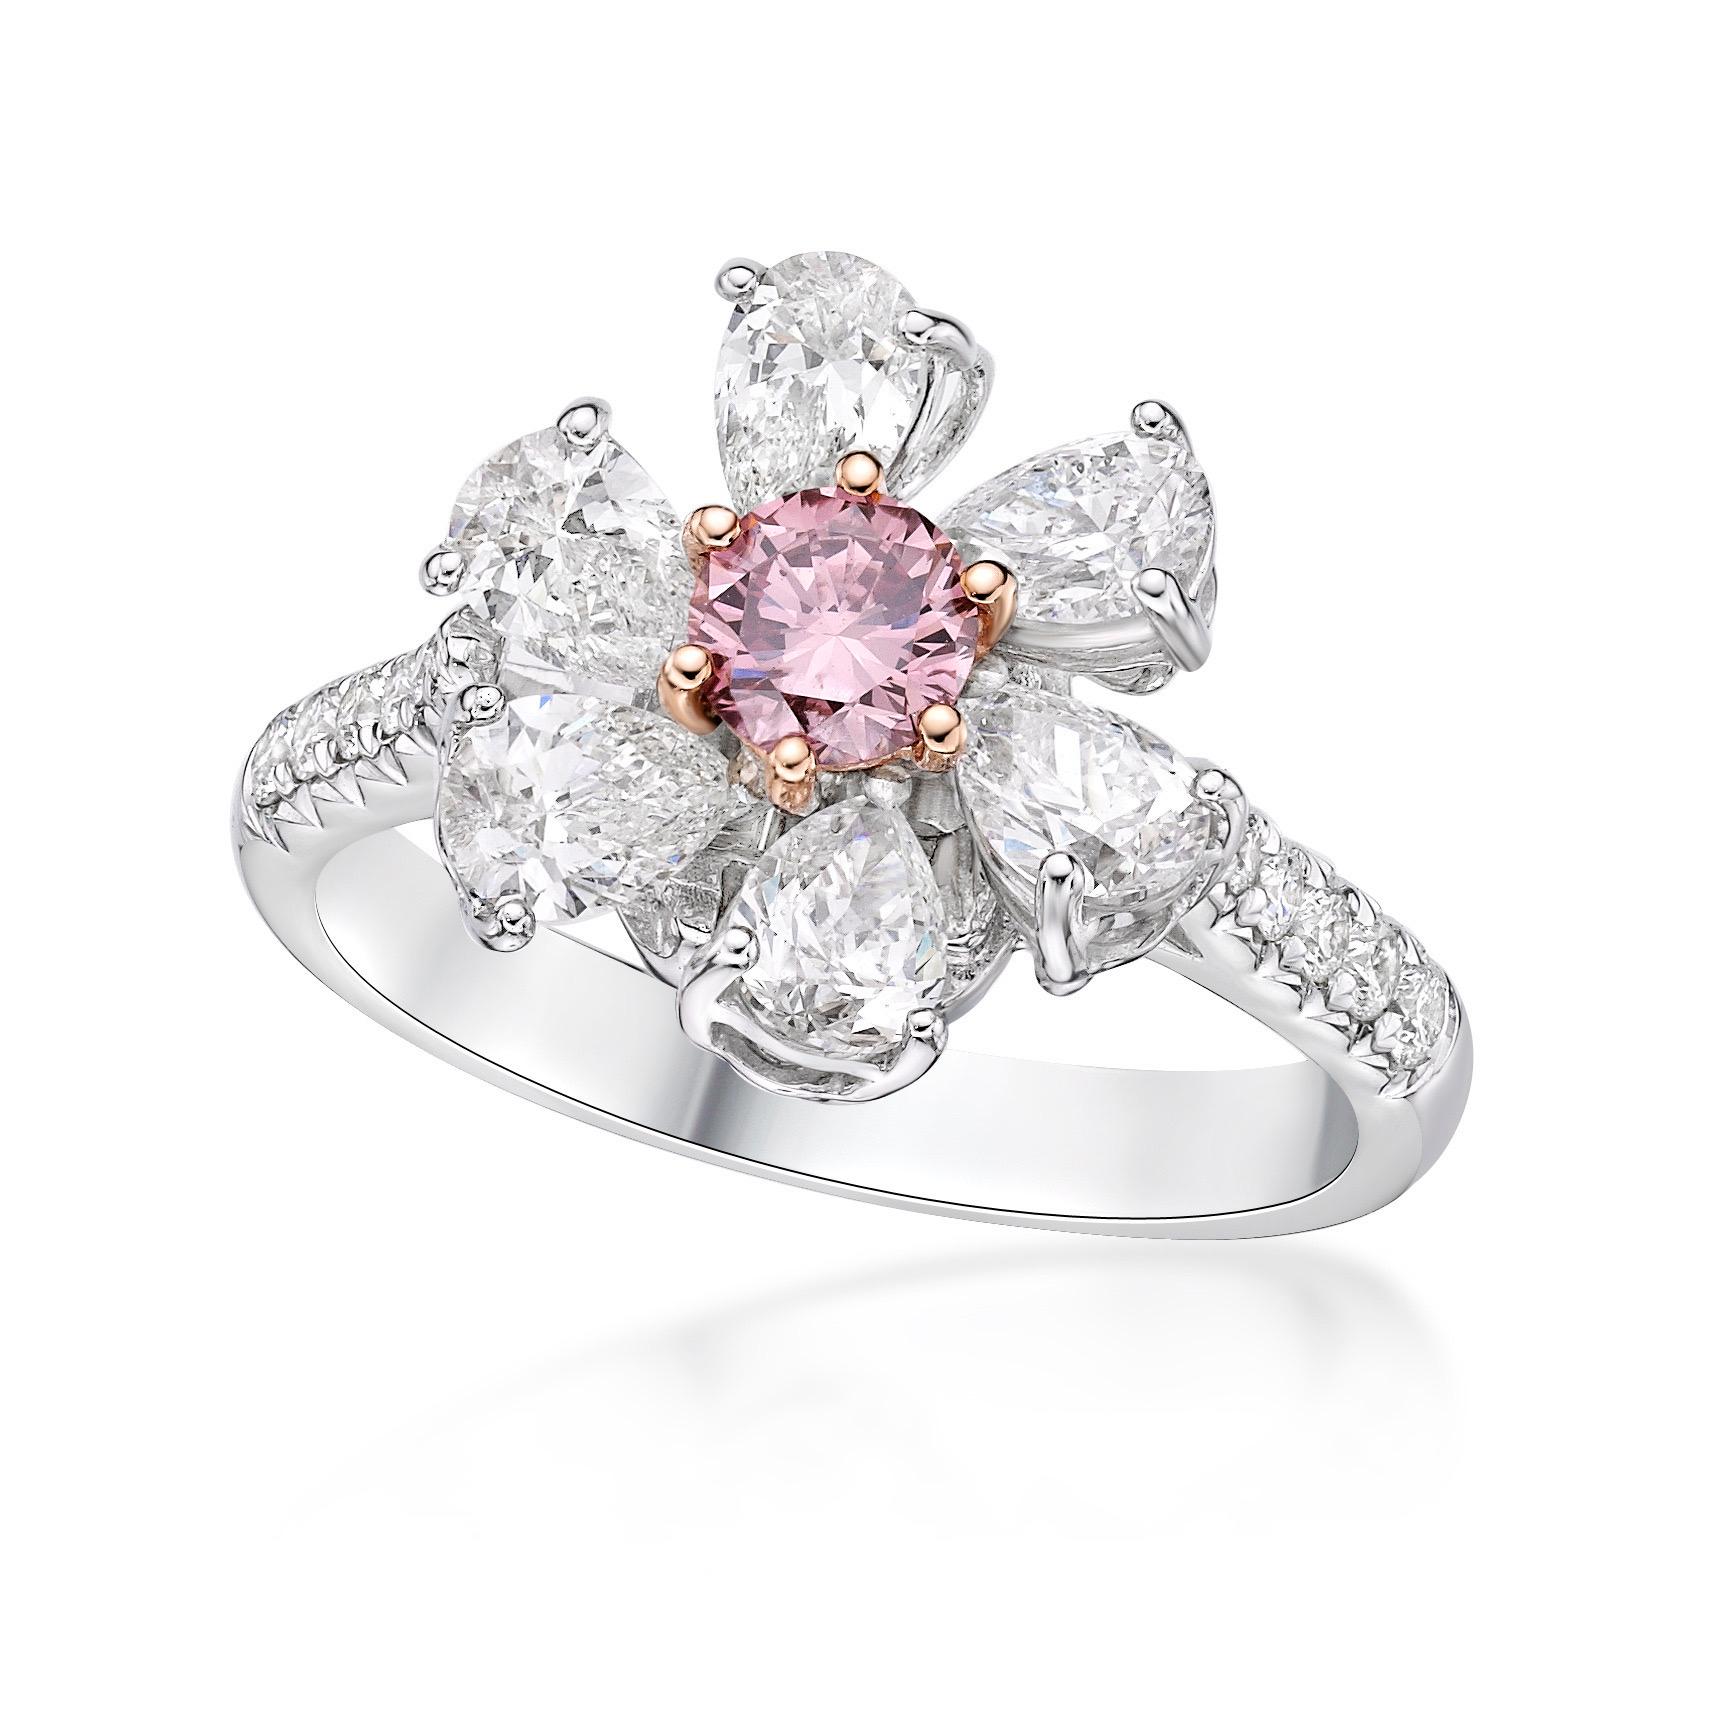 Round Cut Emilio Jewelry Gia Certified 2.02 Carat Fancy Pink Diamond Ring  For Sale